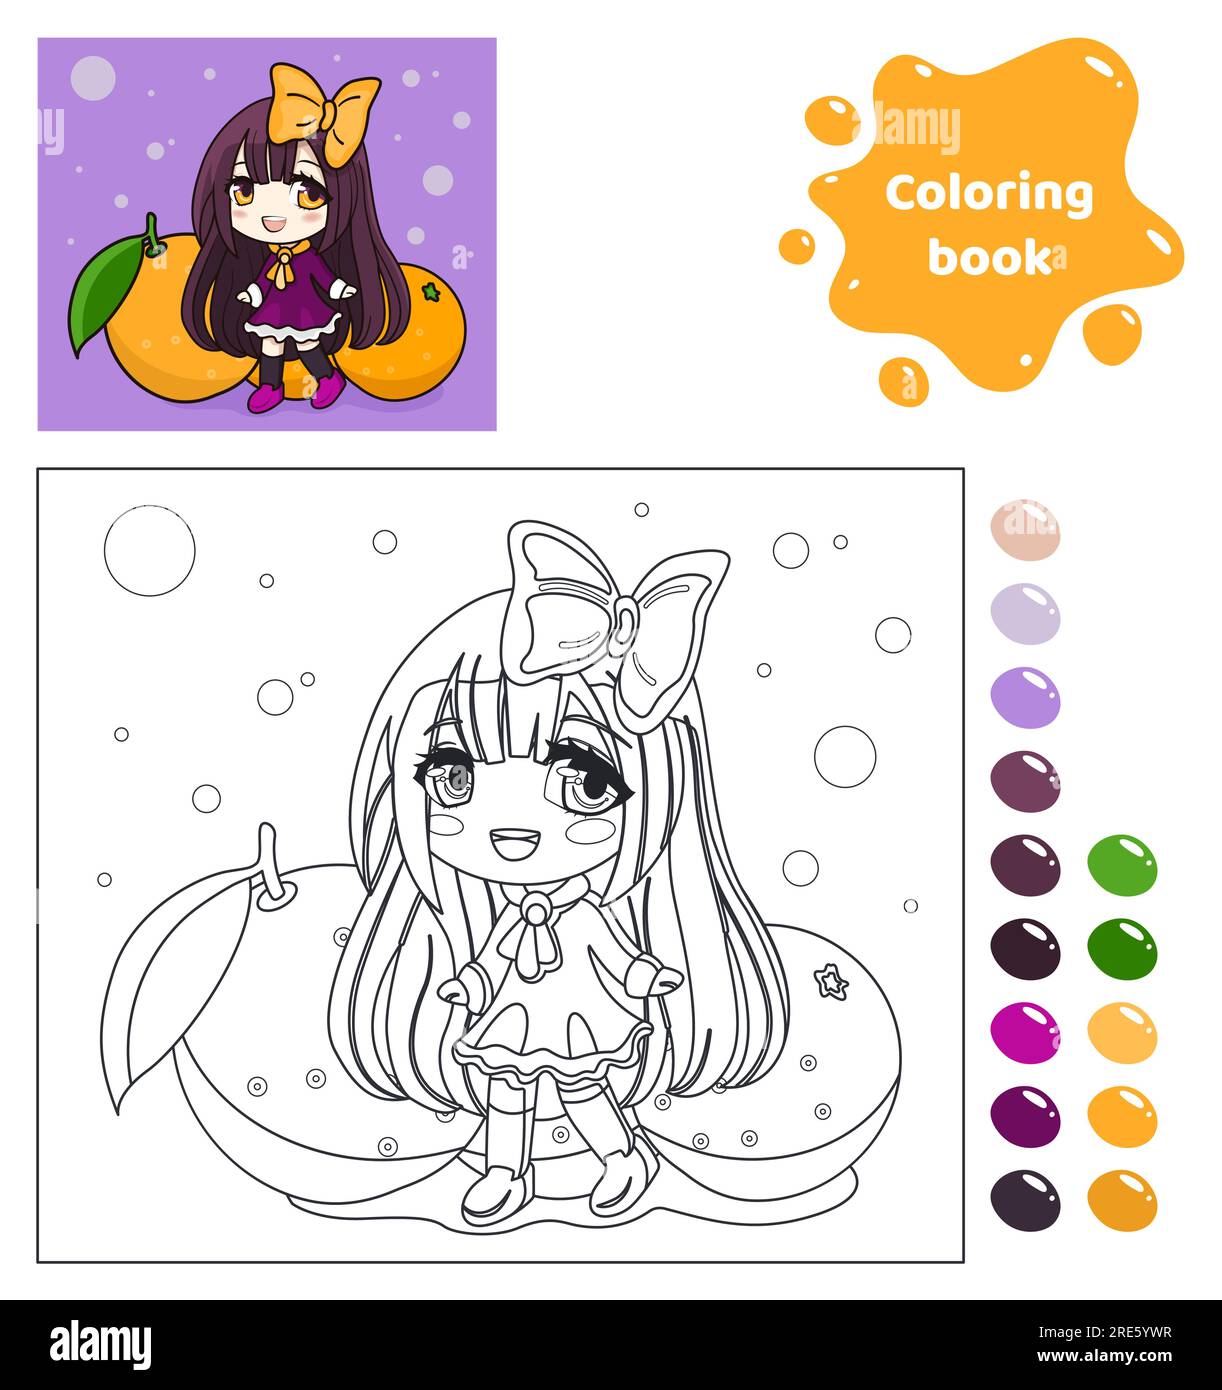 Coloring book for kids. Anime girl with oranges. Stock Vector